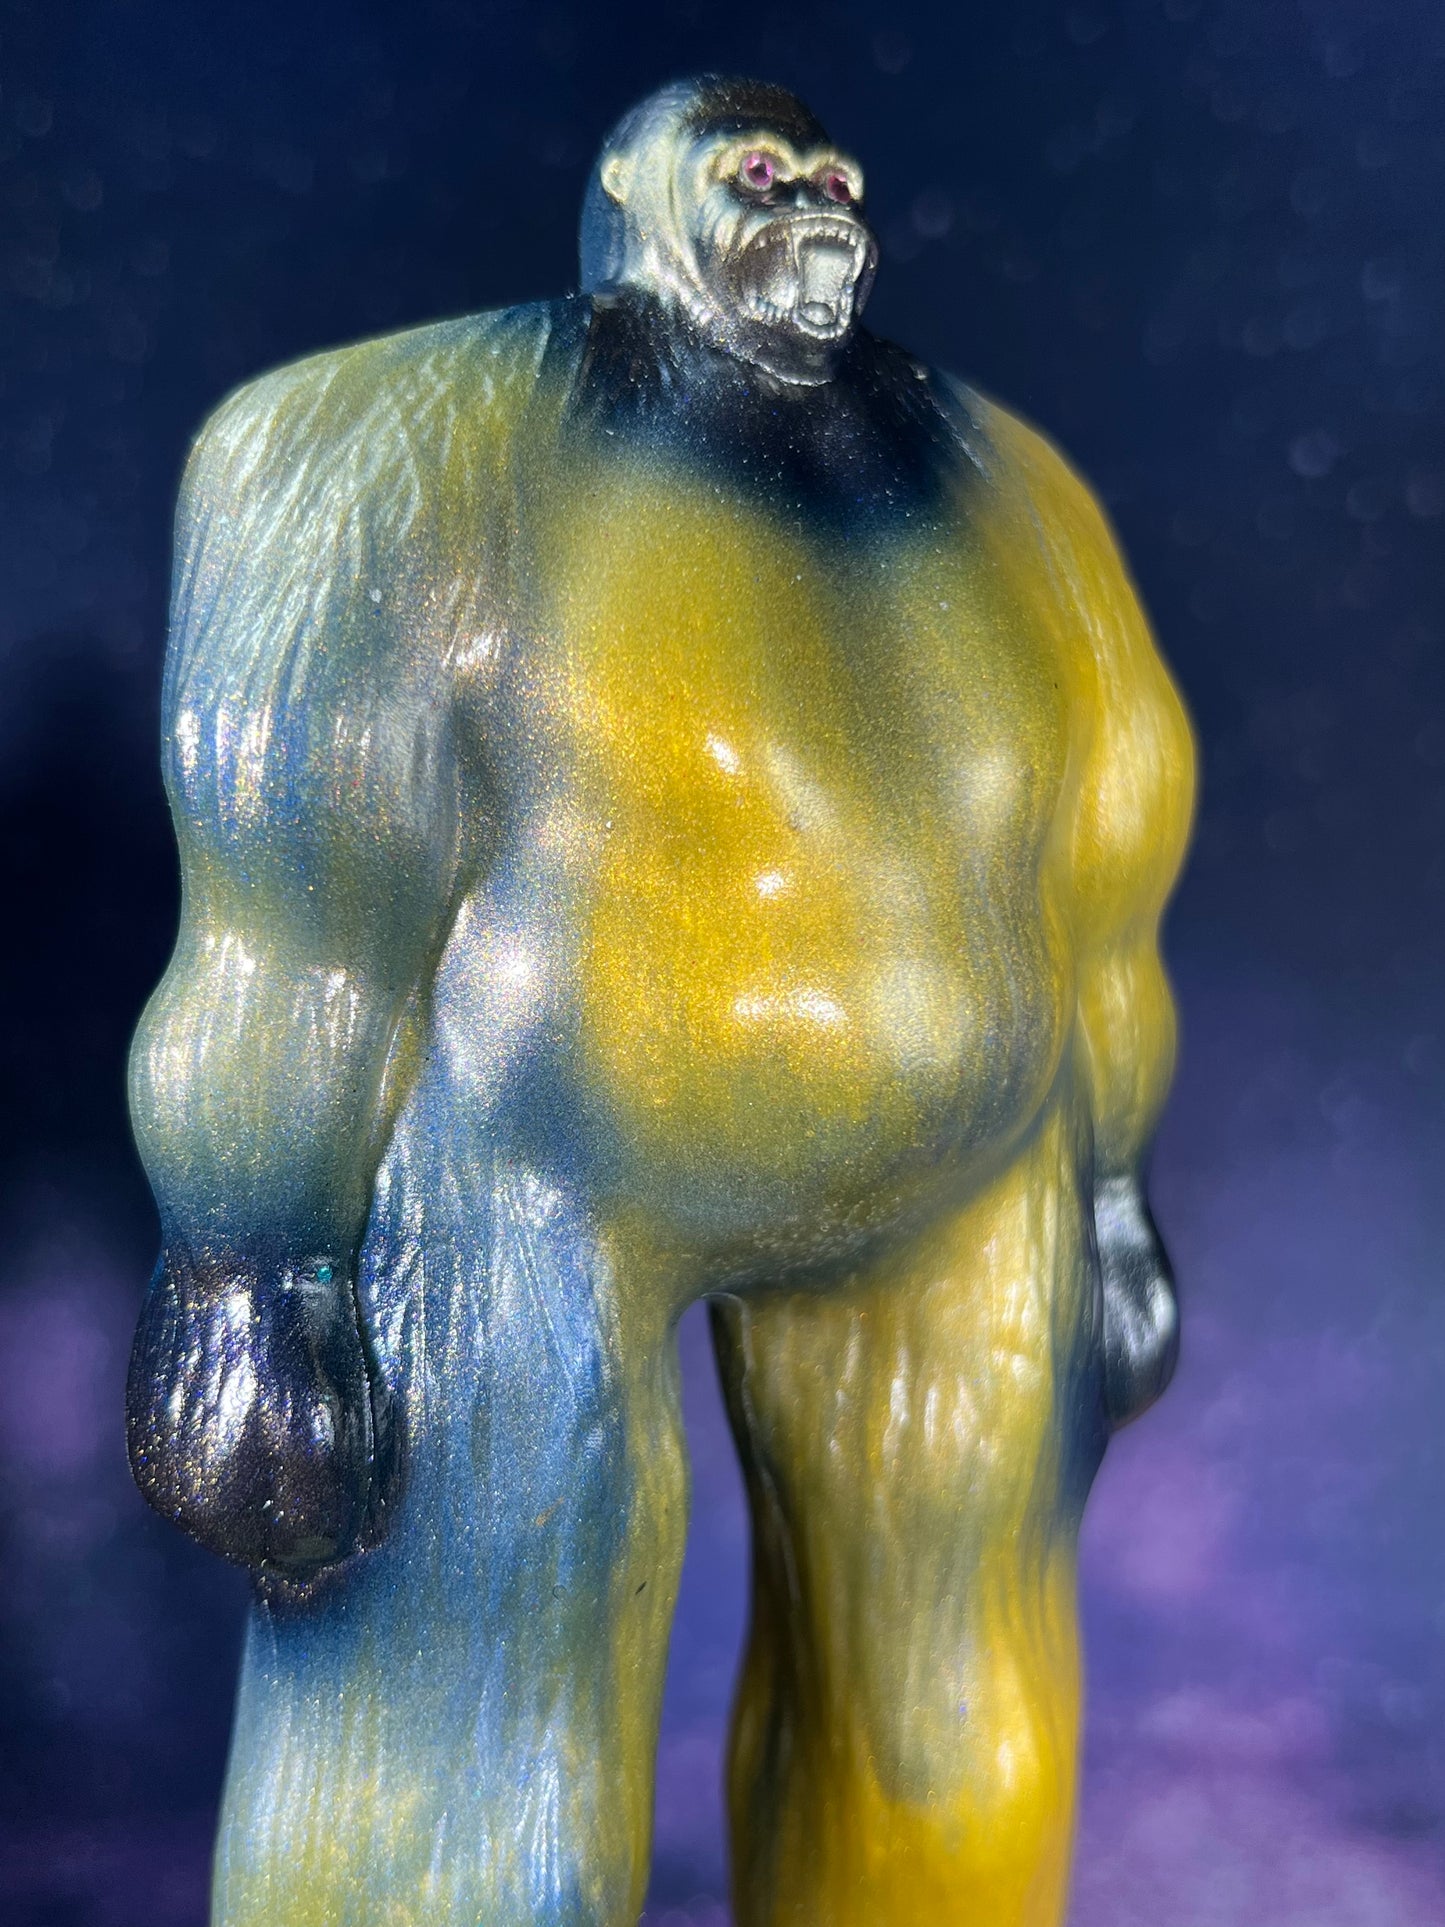 Ape Colossus, The Tiny Headed Giant Ape: Mustard Factory